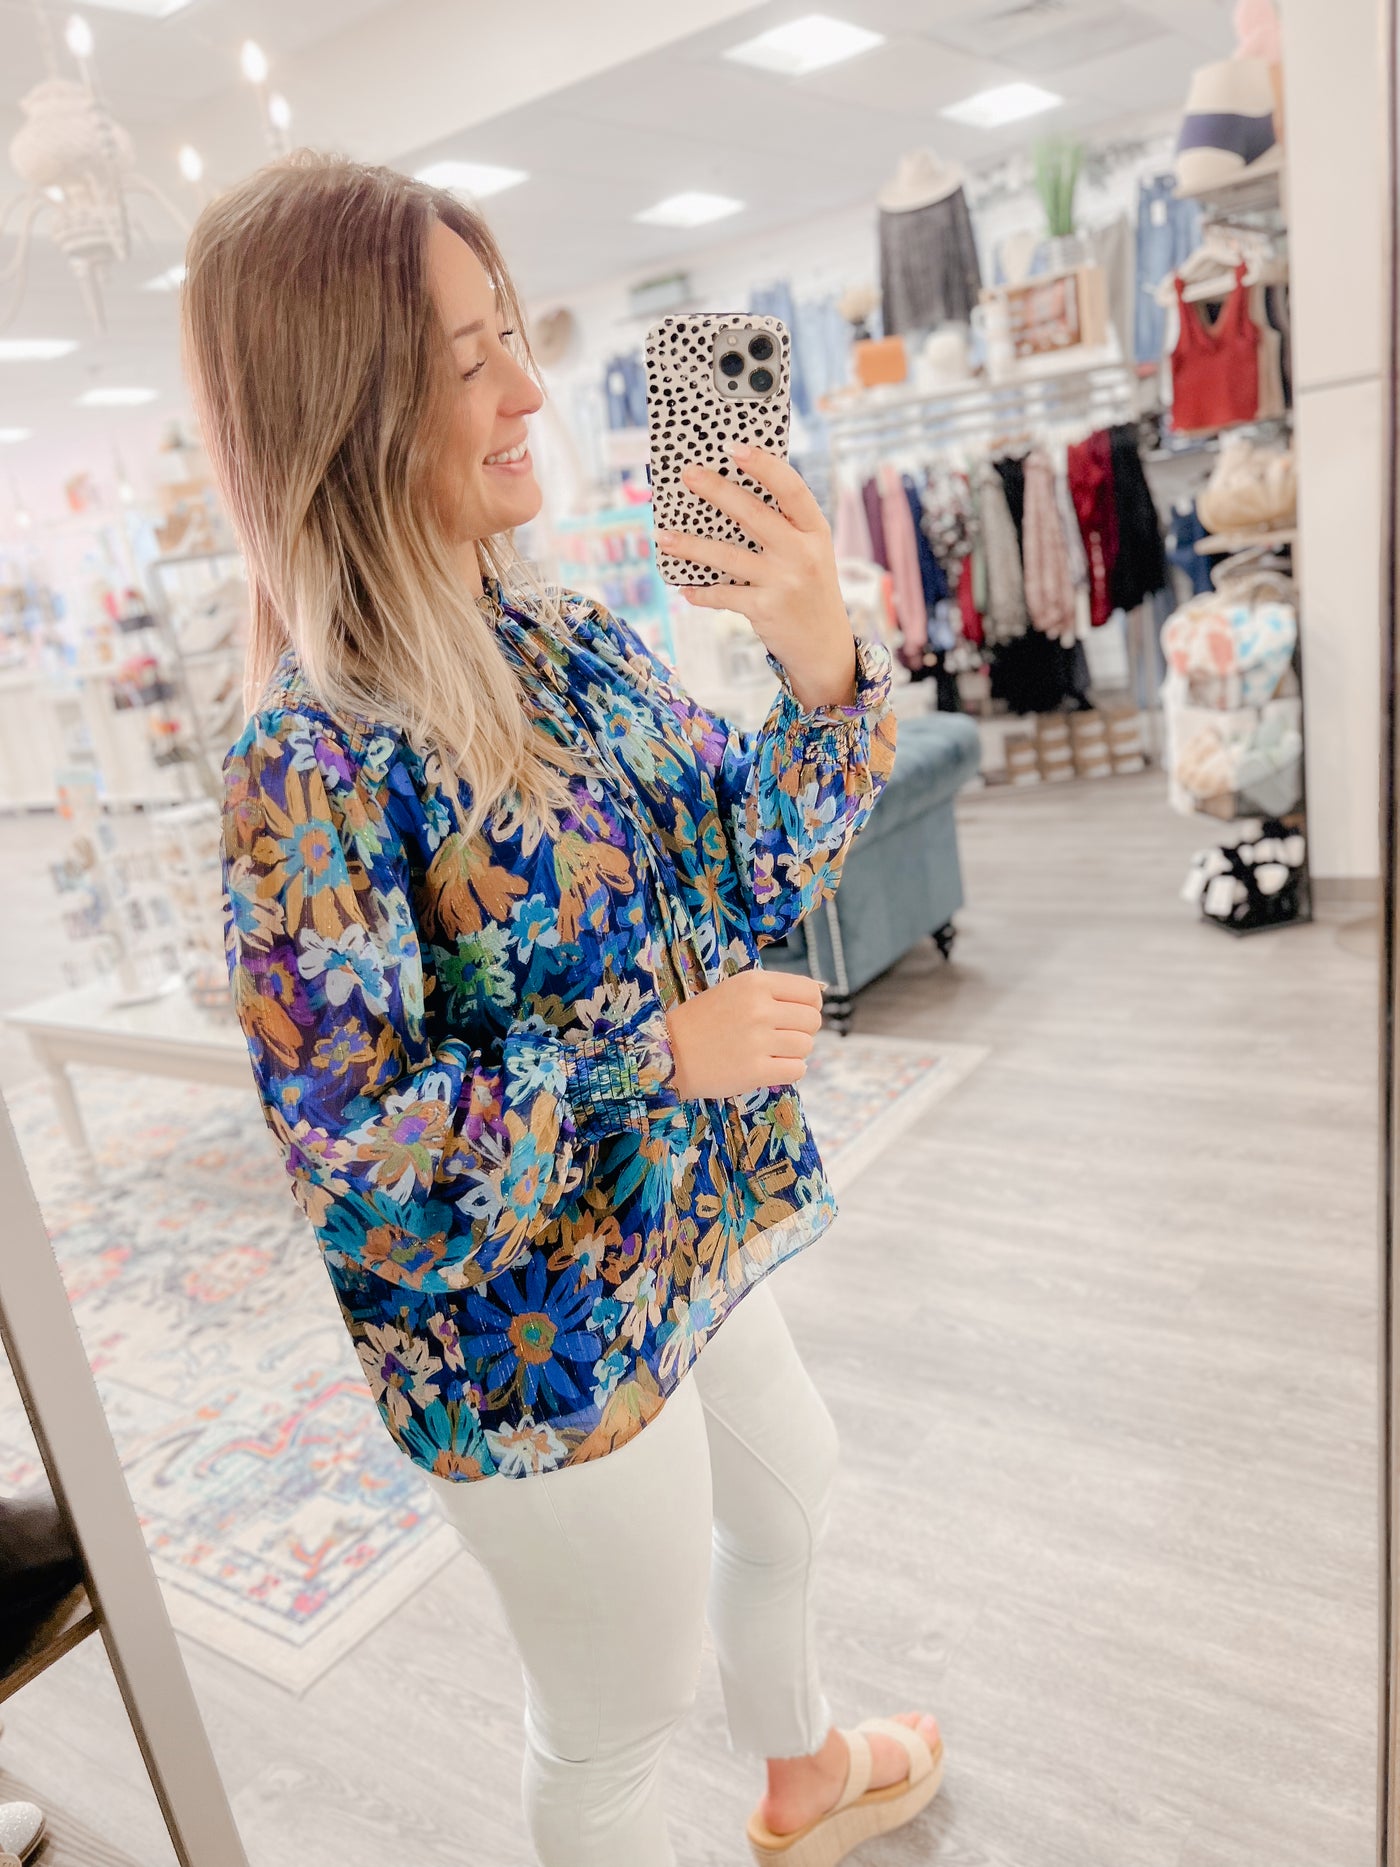 The Astrid Metallic Floral Blouse